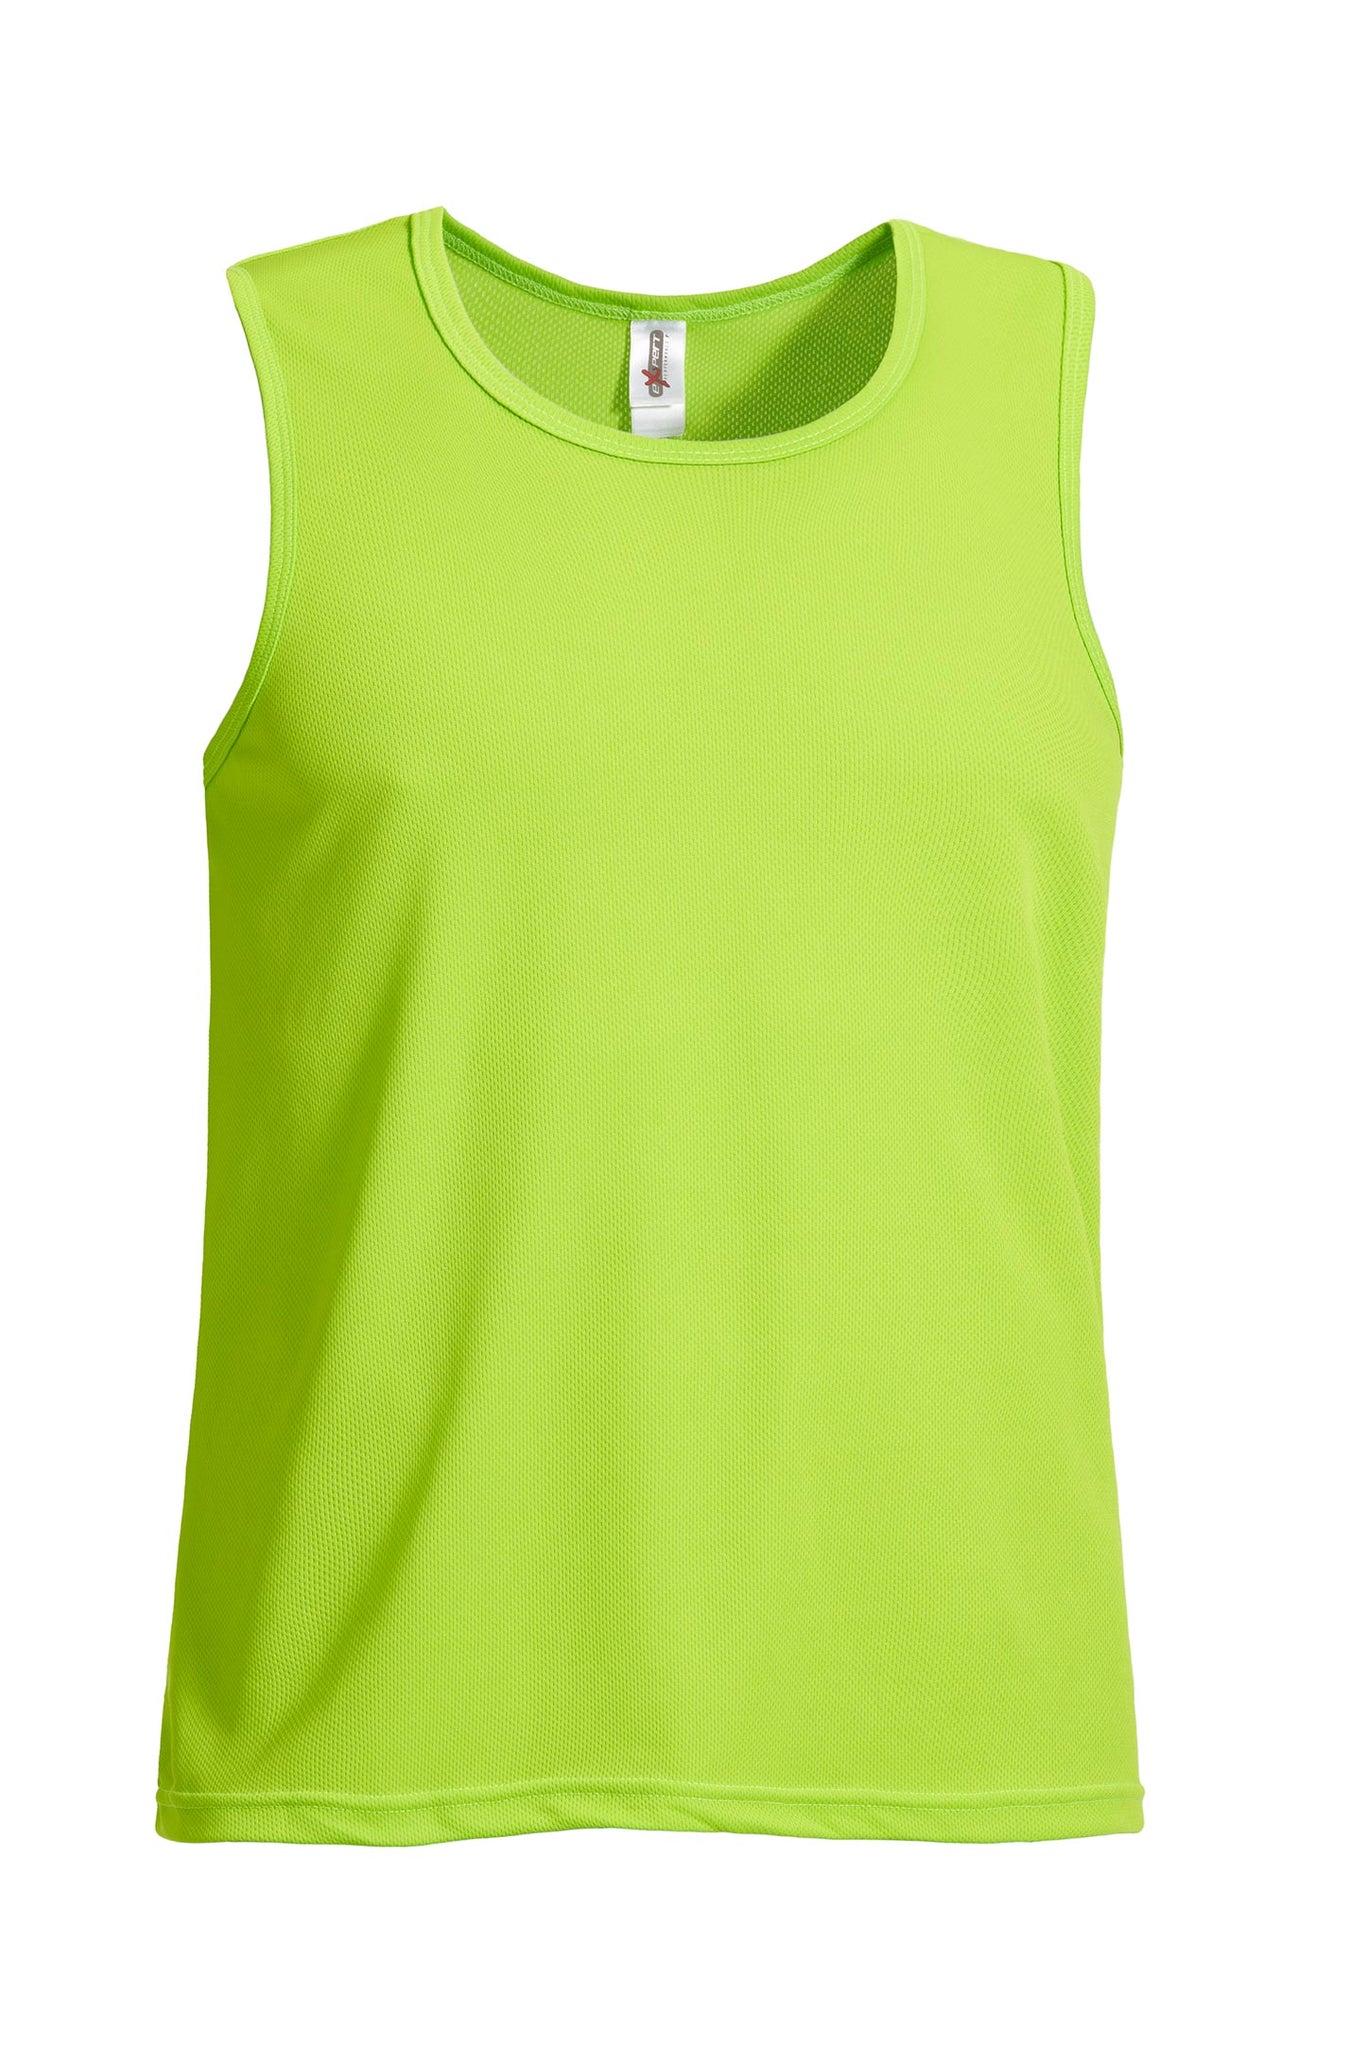 Expert Brand Wholesale Men's Oxymesh™ Sleeveless Tank Made in USA in Key Lime Green#key-lime